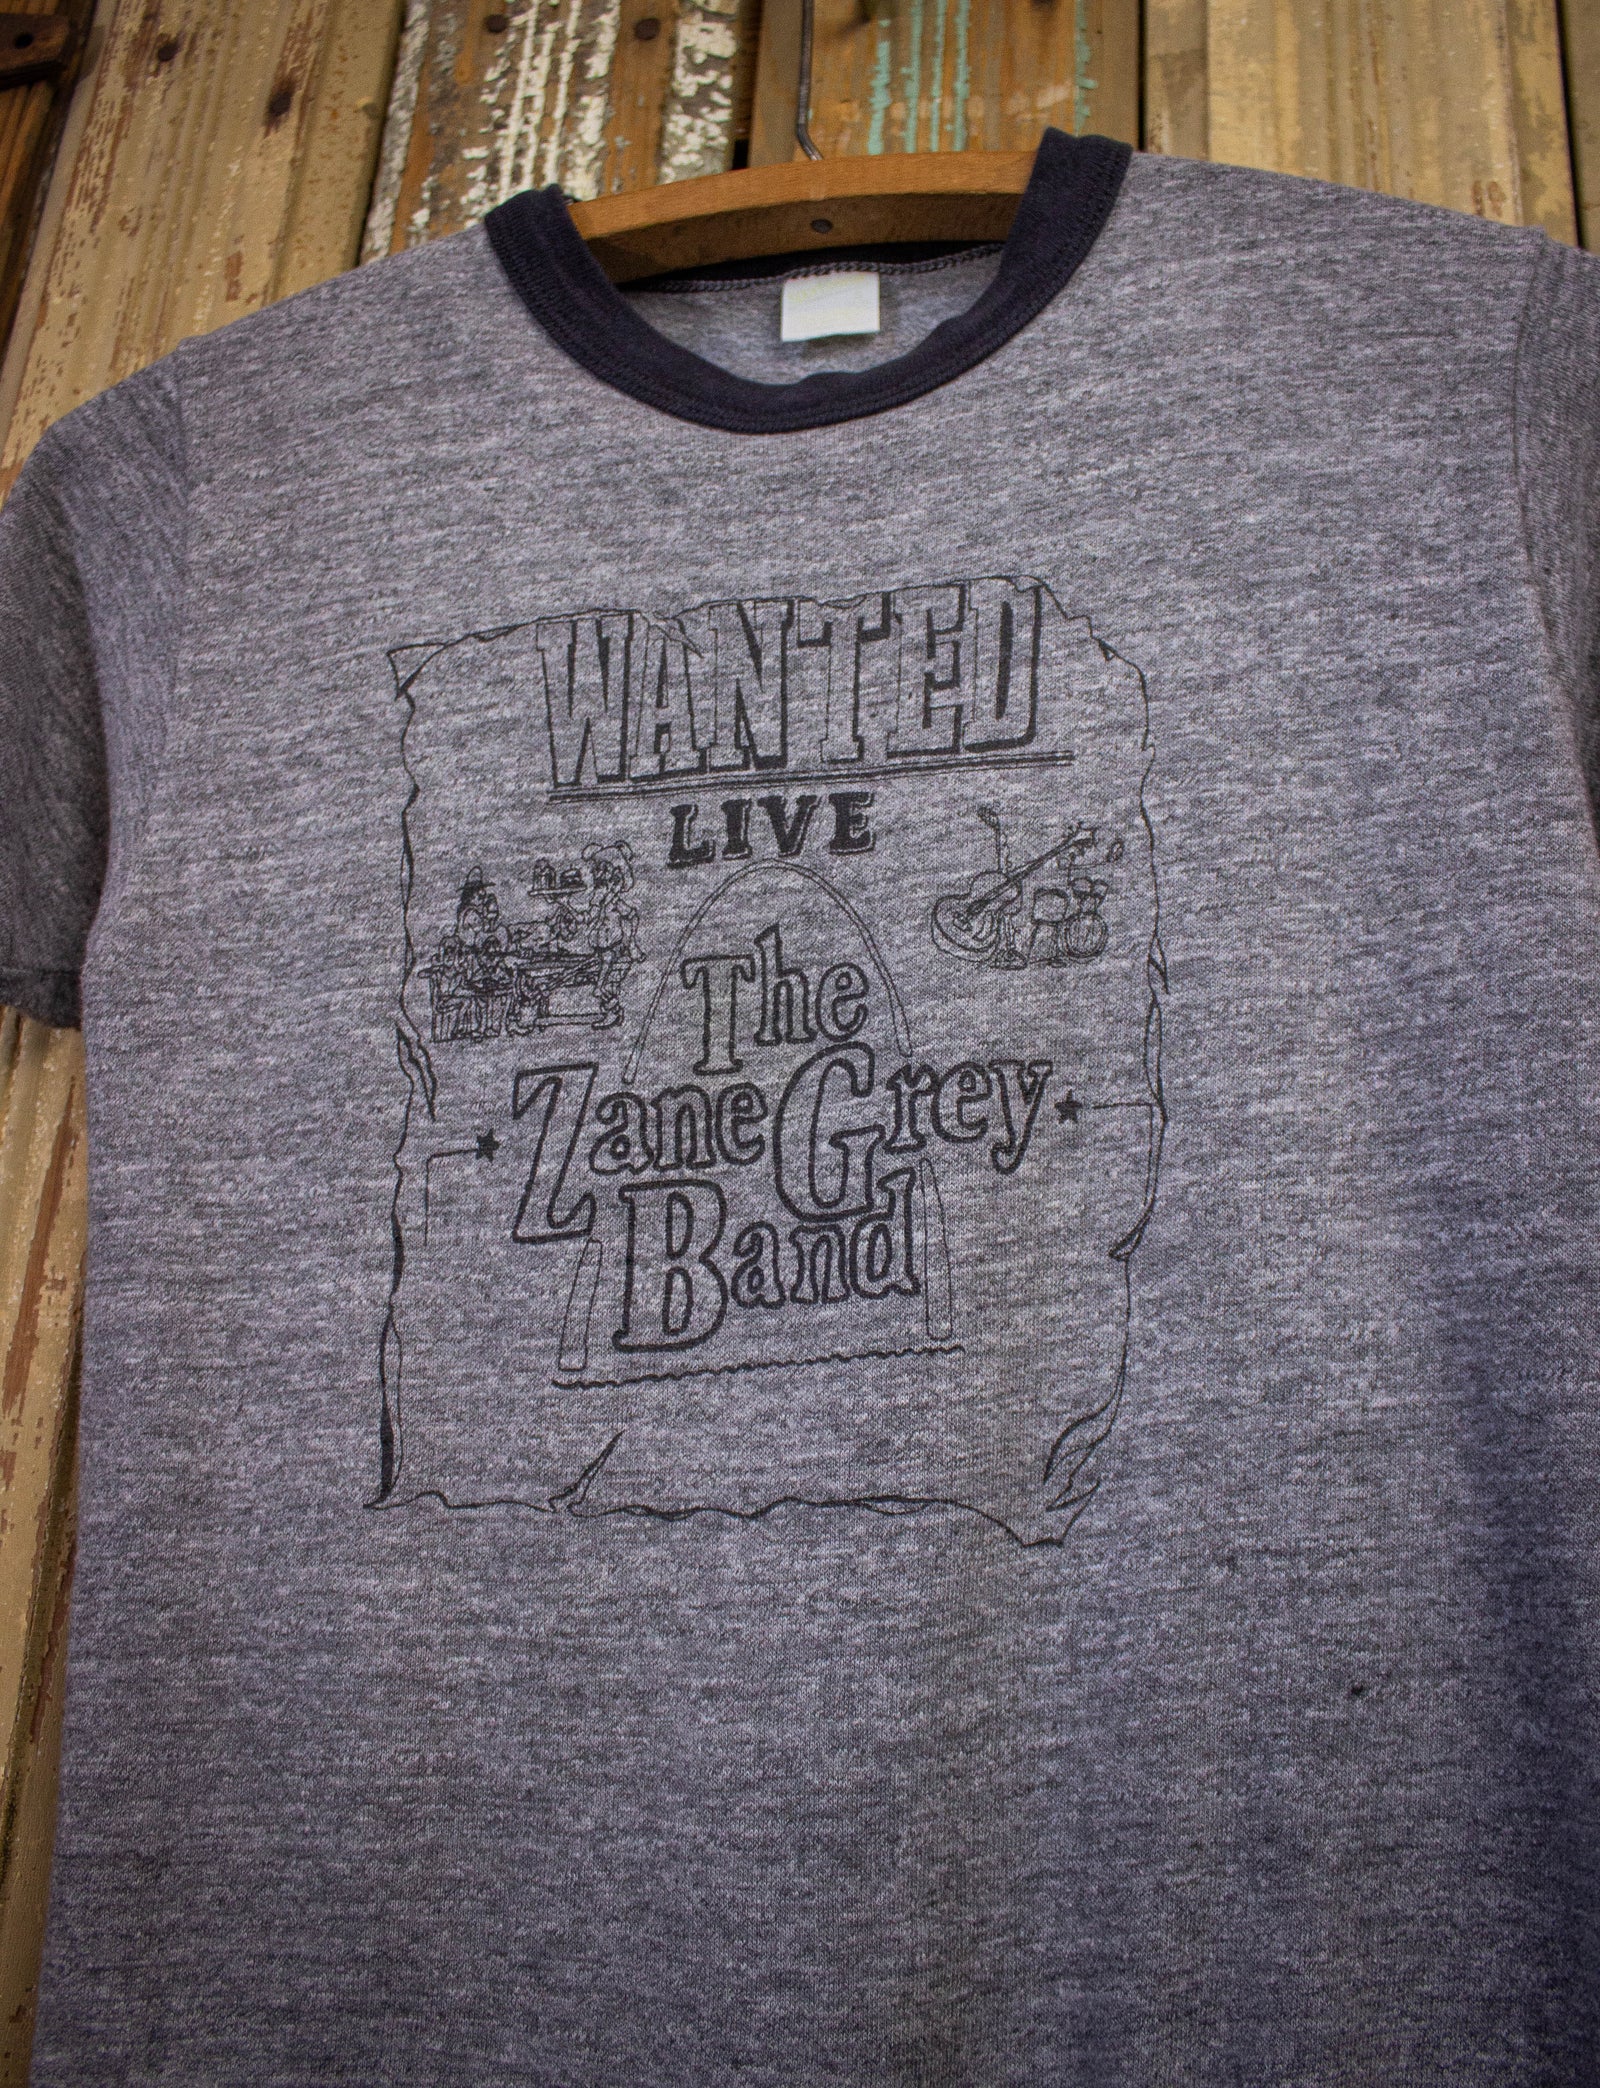 Vintage The Zane Grey Band Wanted Live Ringer Concert T Shirt 70s Gray XS